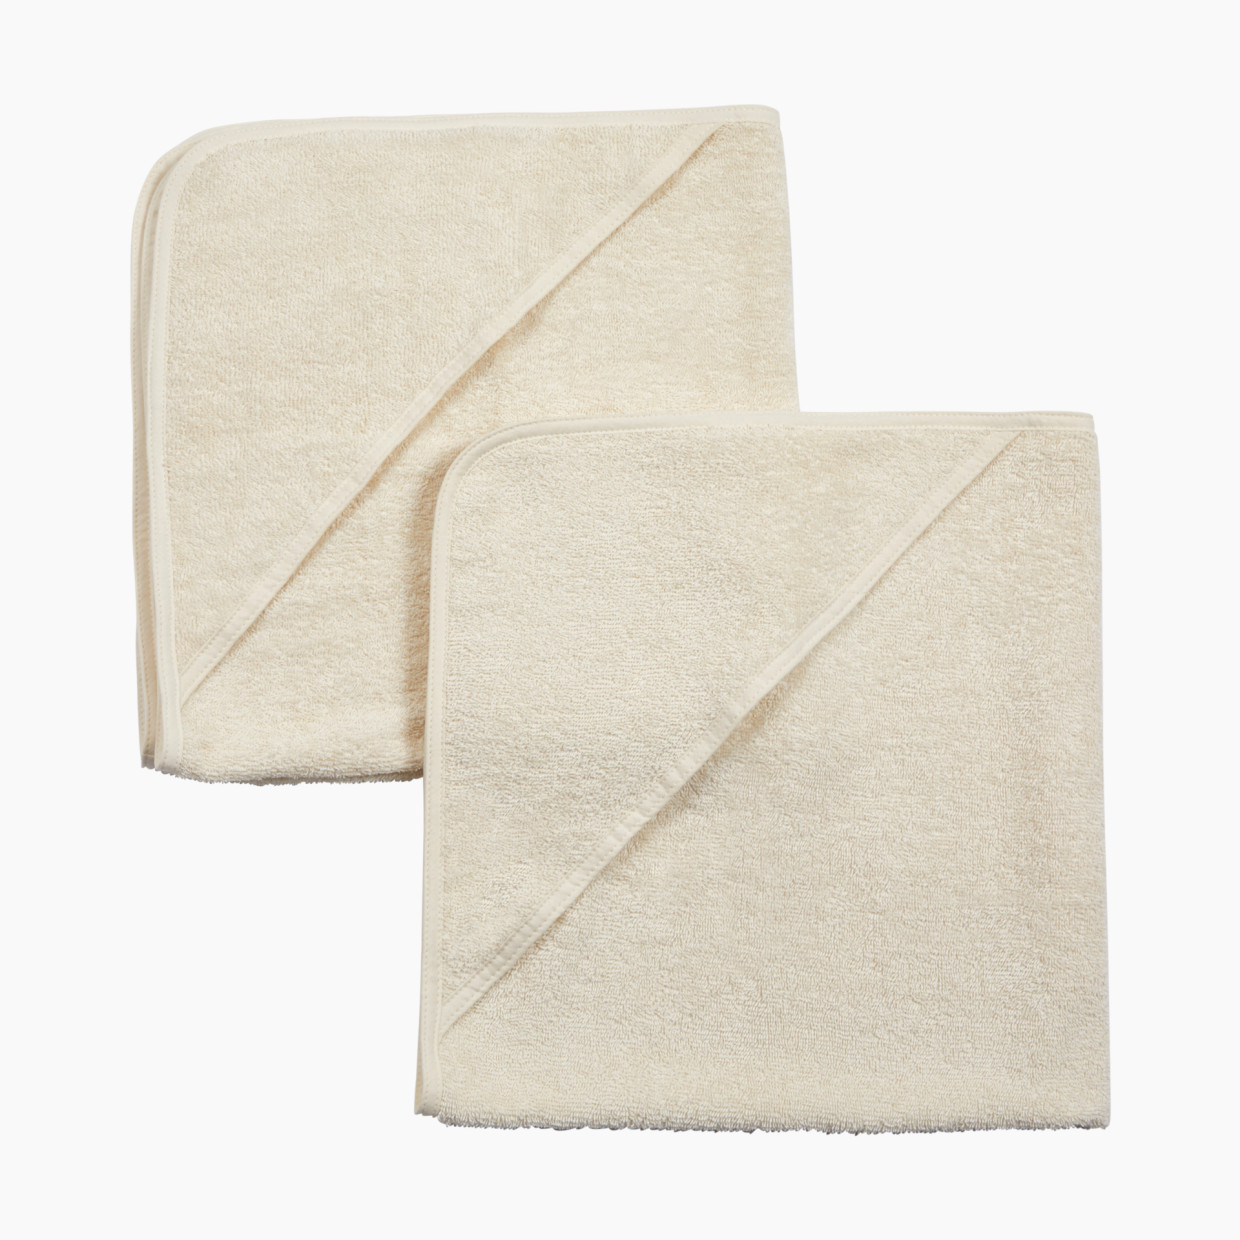 Tiny Kind Hooded Towel (2 Pack) - Antique White, 0-24 M.